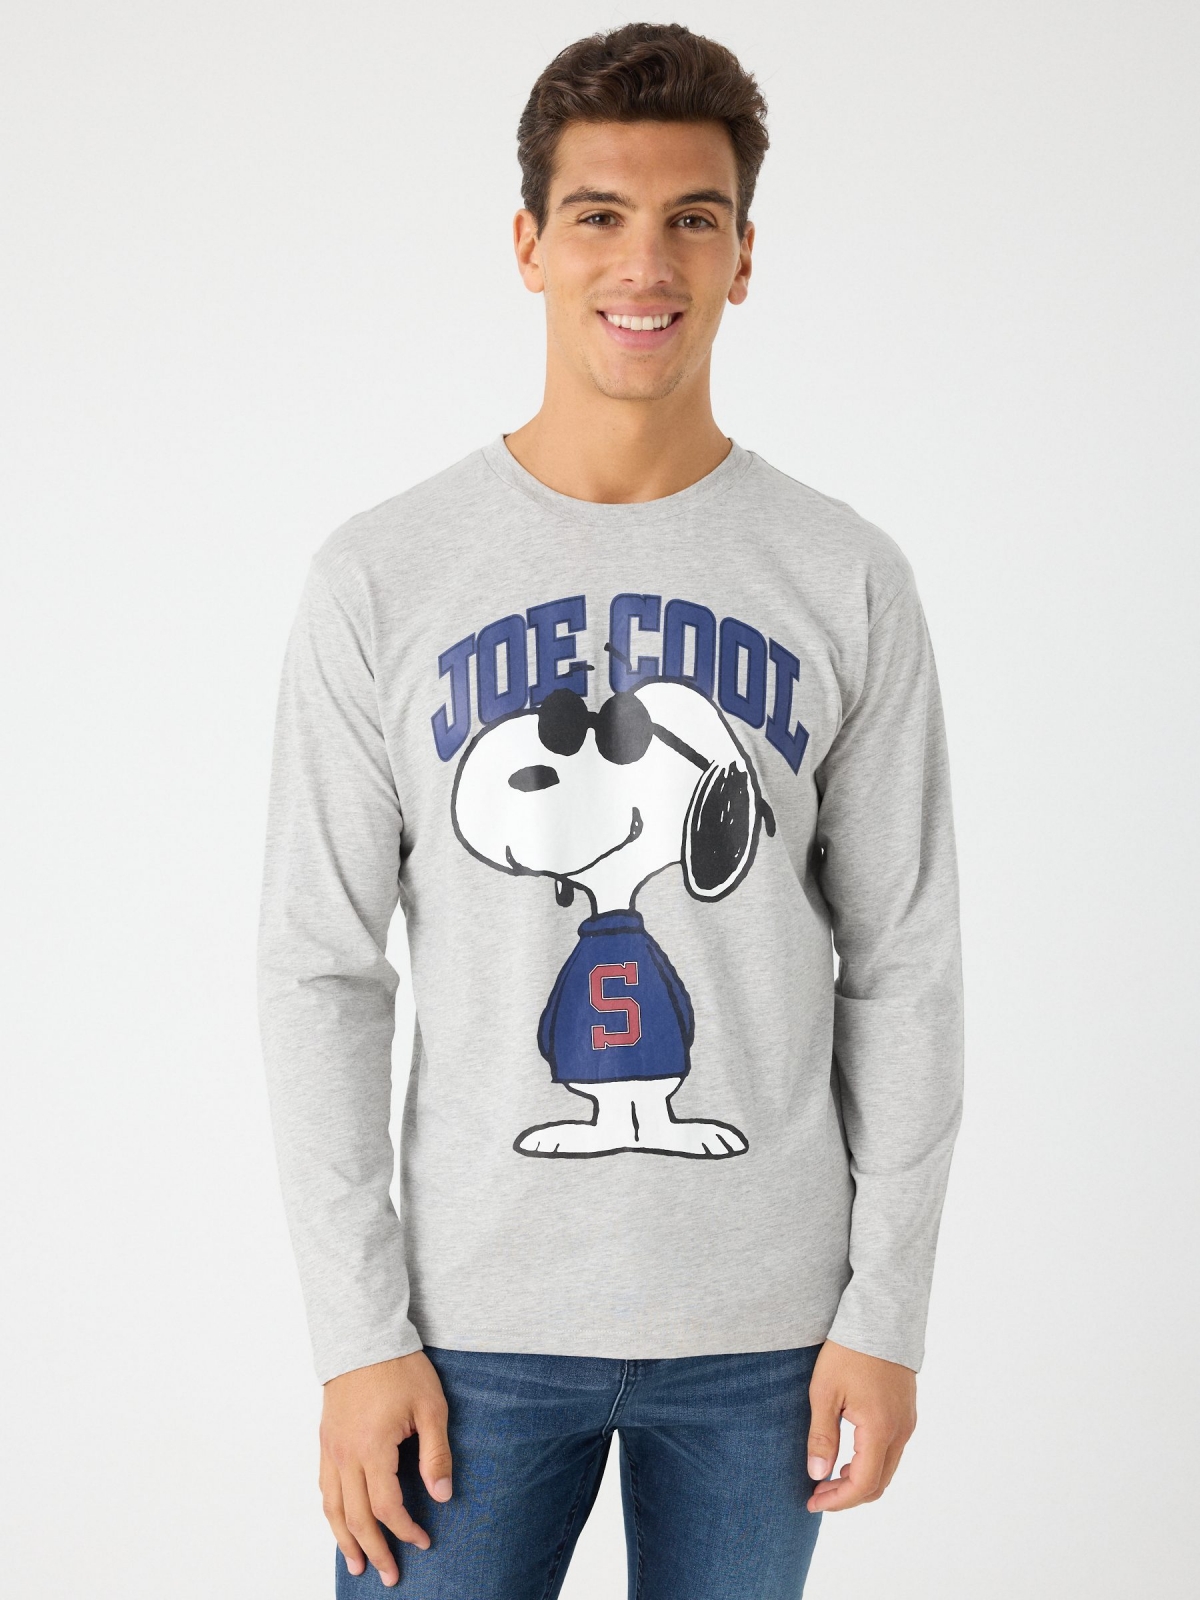 Snoopy long-sleeve t-shirt grey middle front view